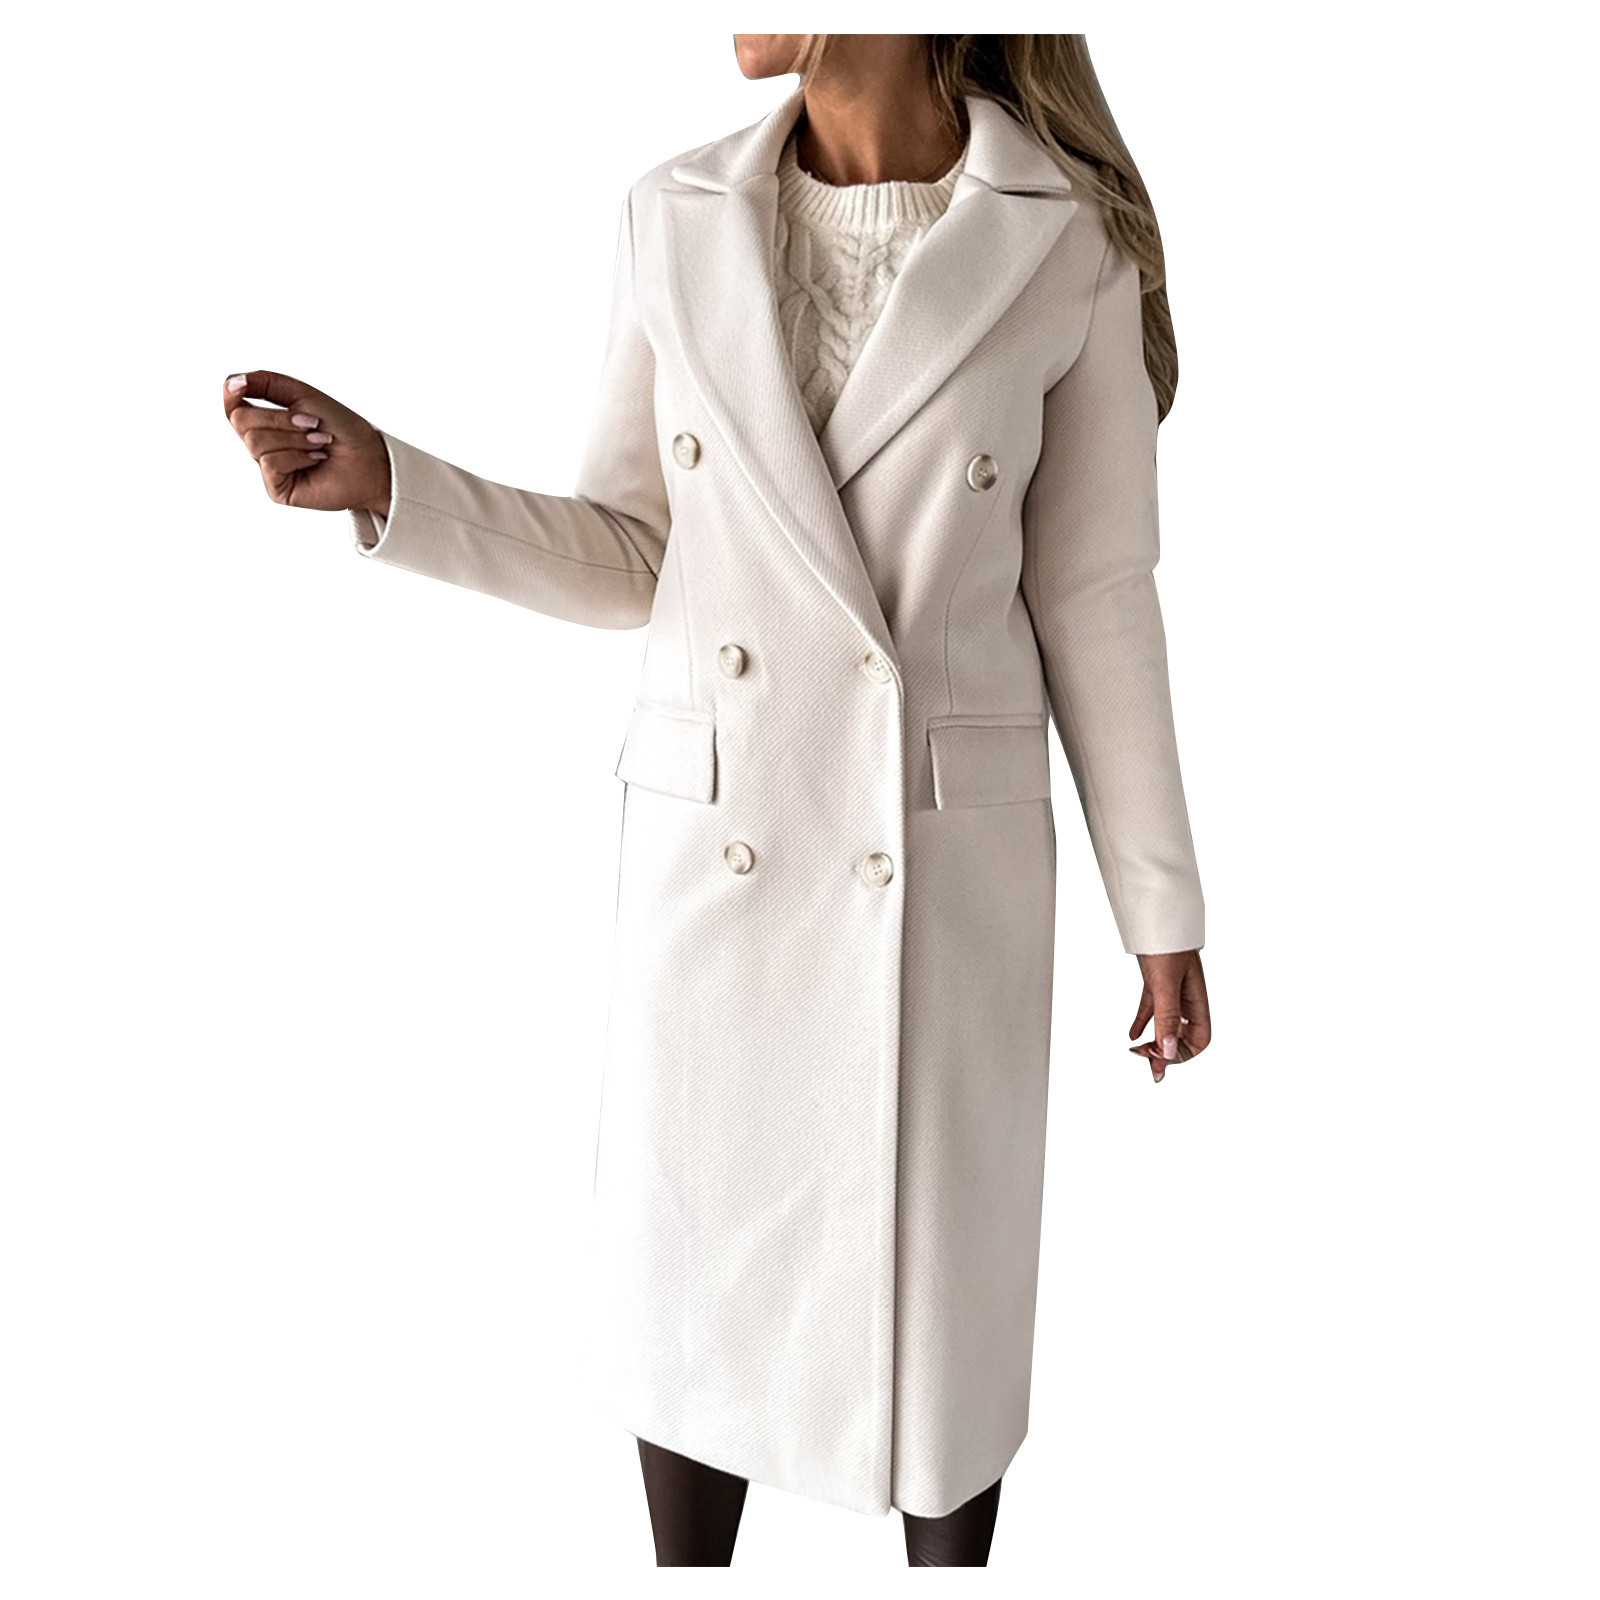 Hfyihgf Women's Double Breasted Trench Coat Classic Notch Collar Long Sleeve Peacoats Winter Warm Slim Fit Long Woolen Jackets Coat with Pockets Clearance(Beige,L) - image 1 of 5